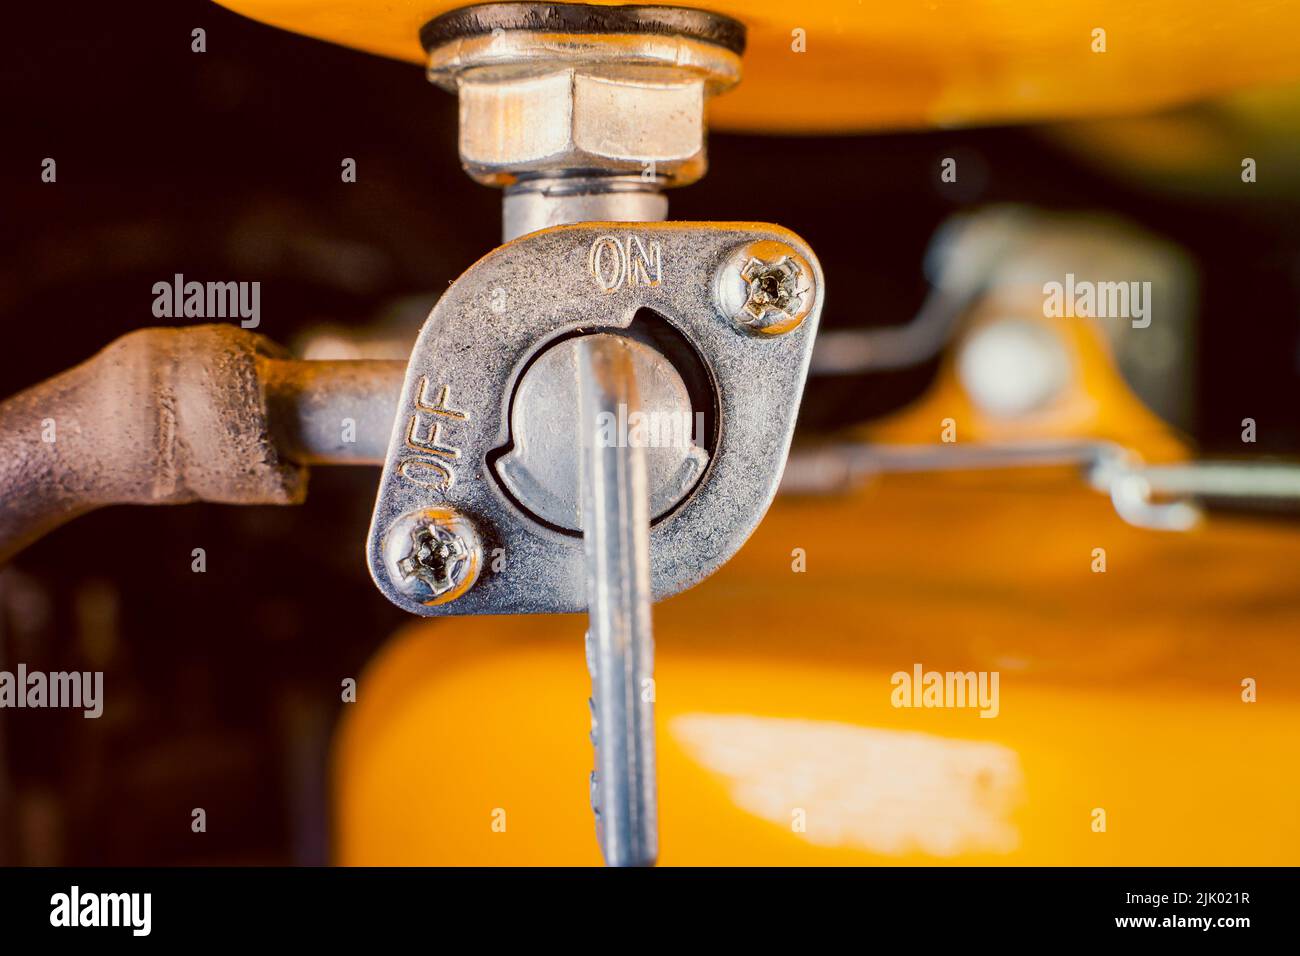 Fuel valve of a gasoline generator close-up with an open fuel supply Stock Photo